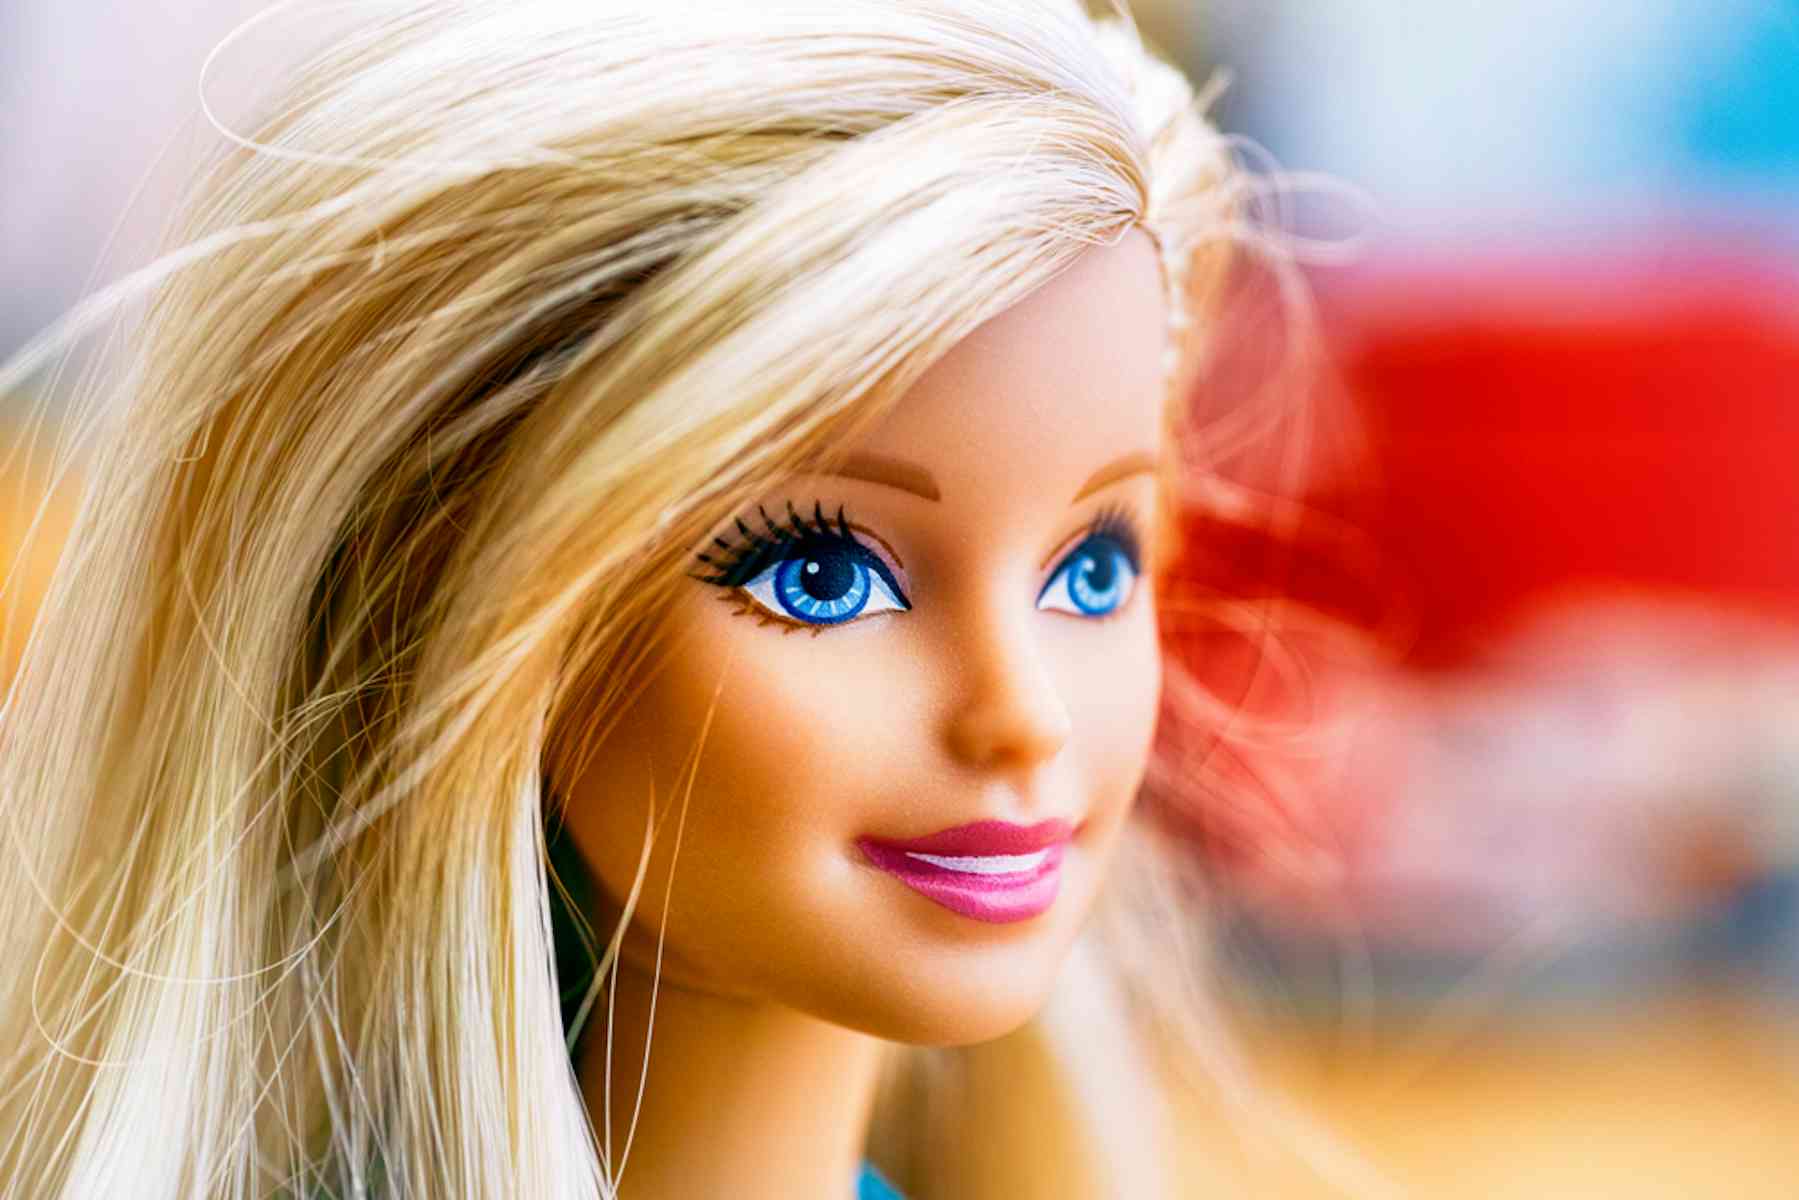 The real story of the Barbie doll strong female leadership behind the